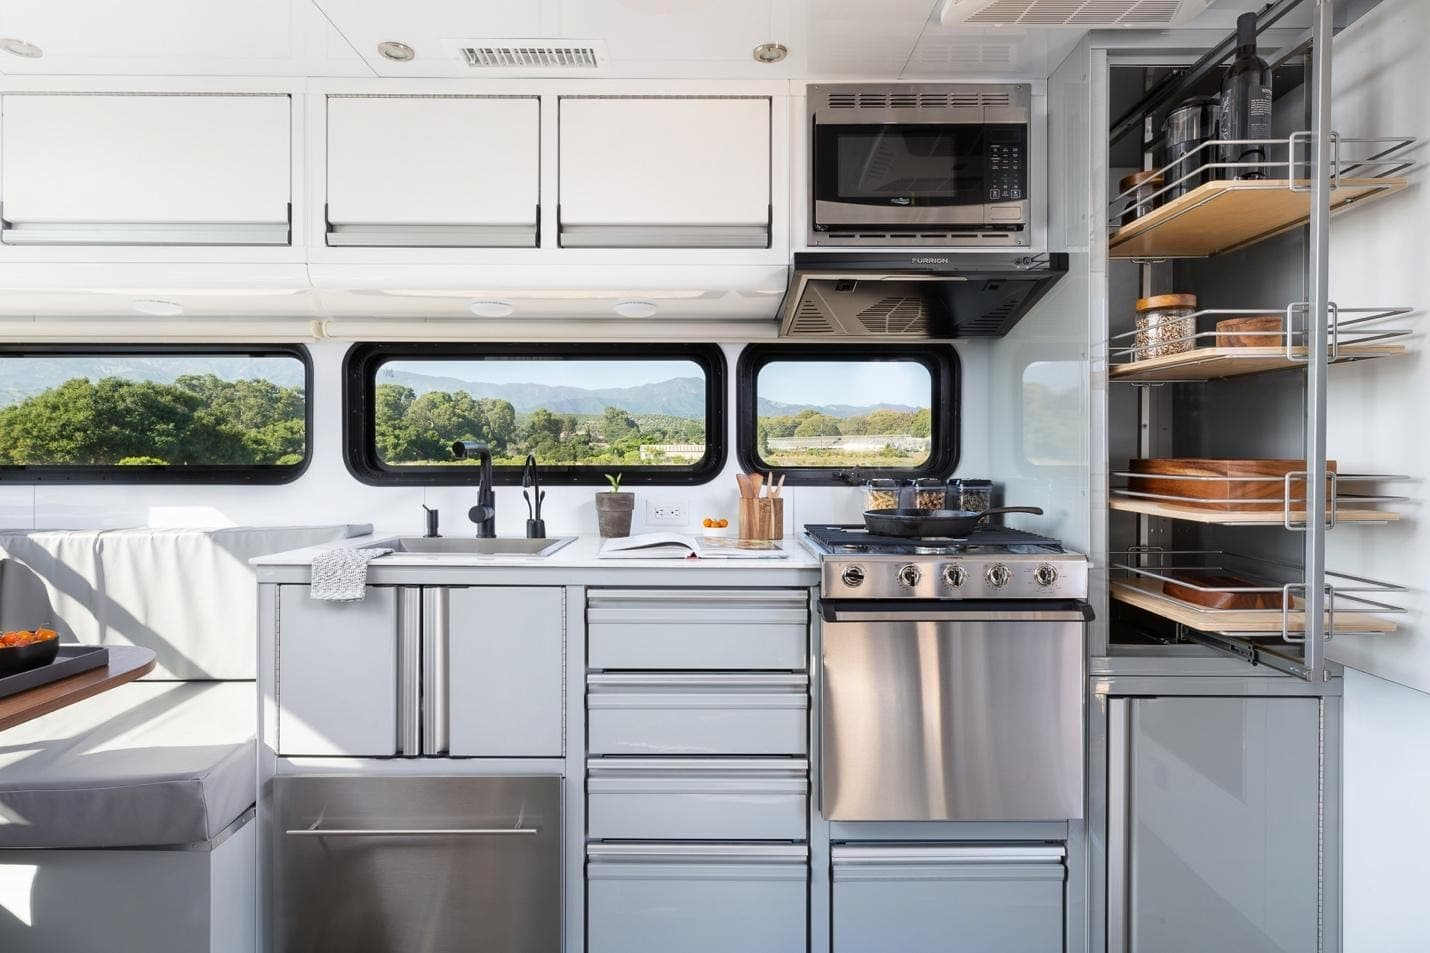 Cleaning and Sanitizing Your Campervan Kitchen: 7 Essential Steps for a Hygienic Cooking Space